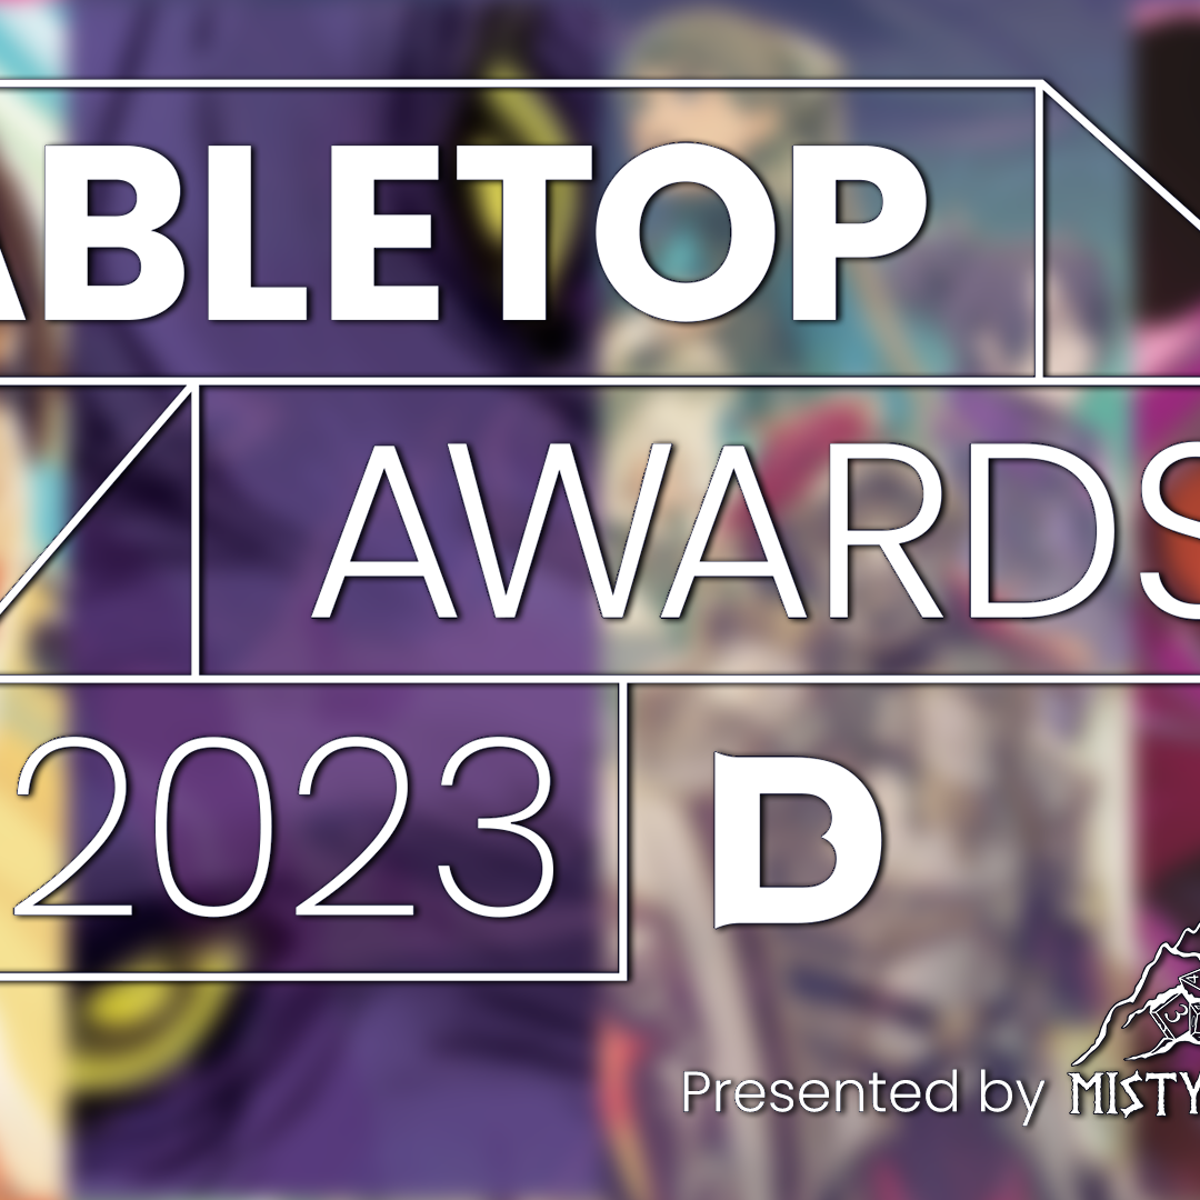 Tabletop Awards 2022 winners: The year's best board game, RPG